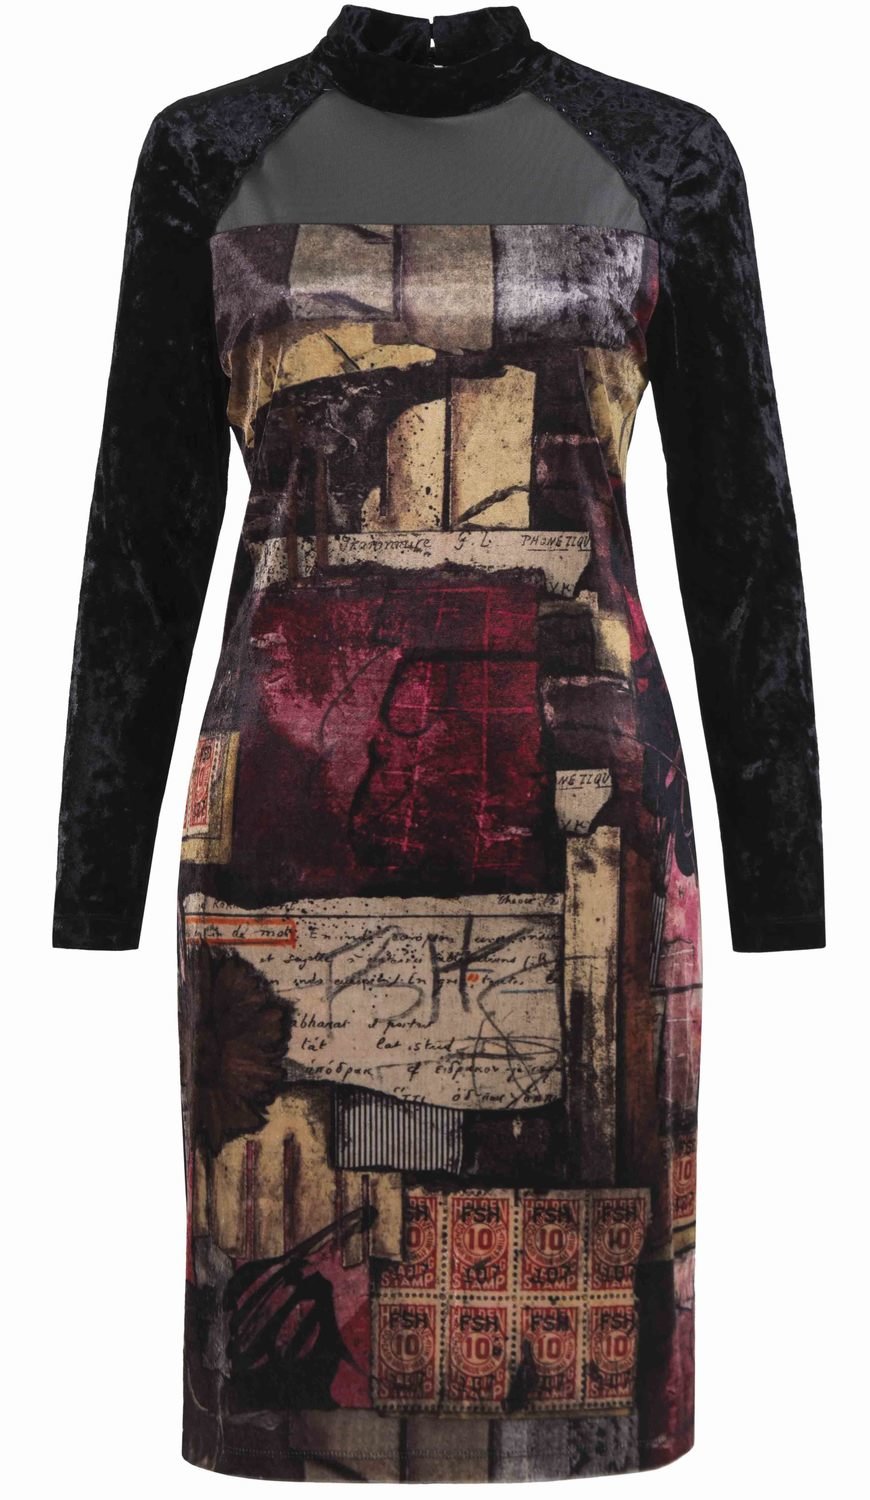 Simply Art Dolcezza: Letter Of Love & Espresso Abstract Art Velvet Midi Dress SOLD OUT